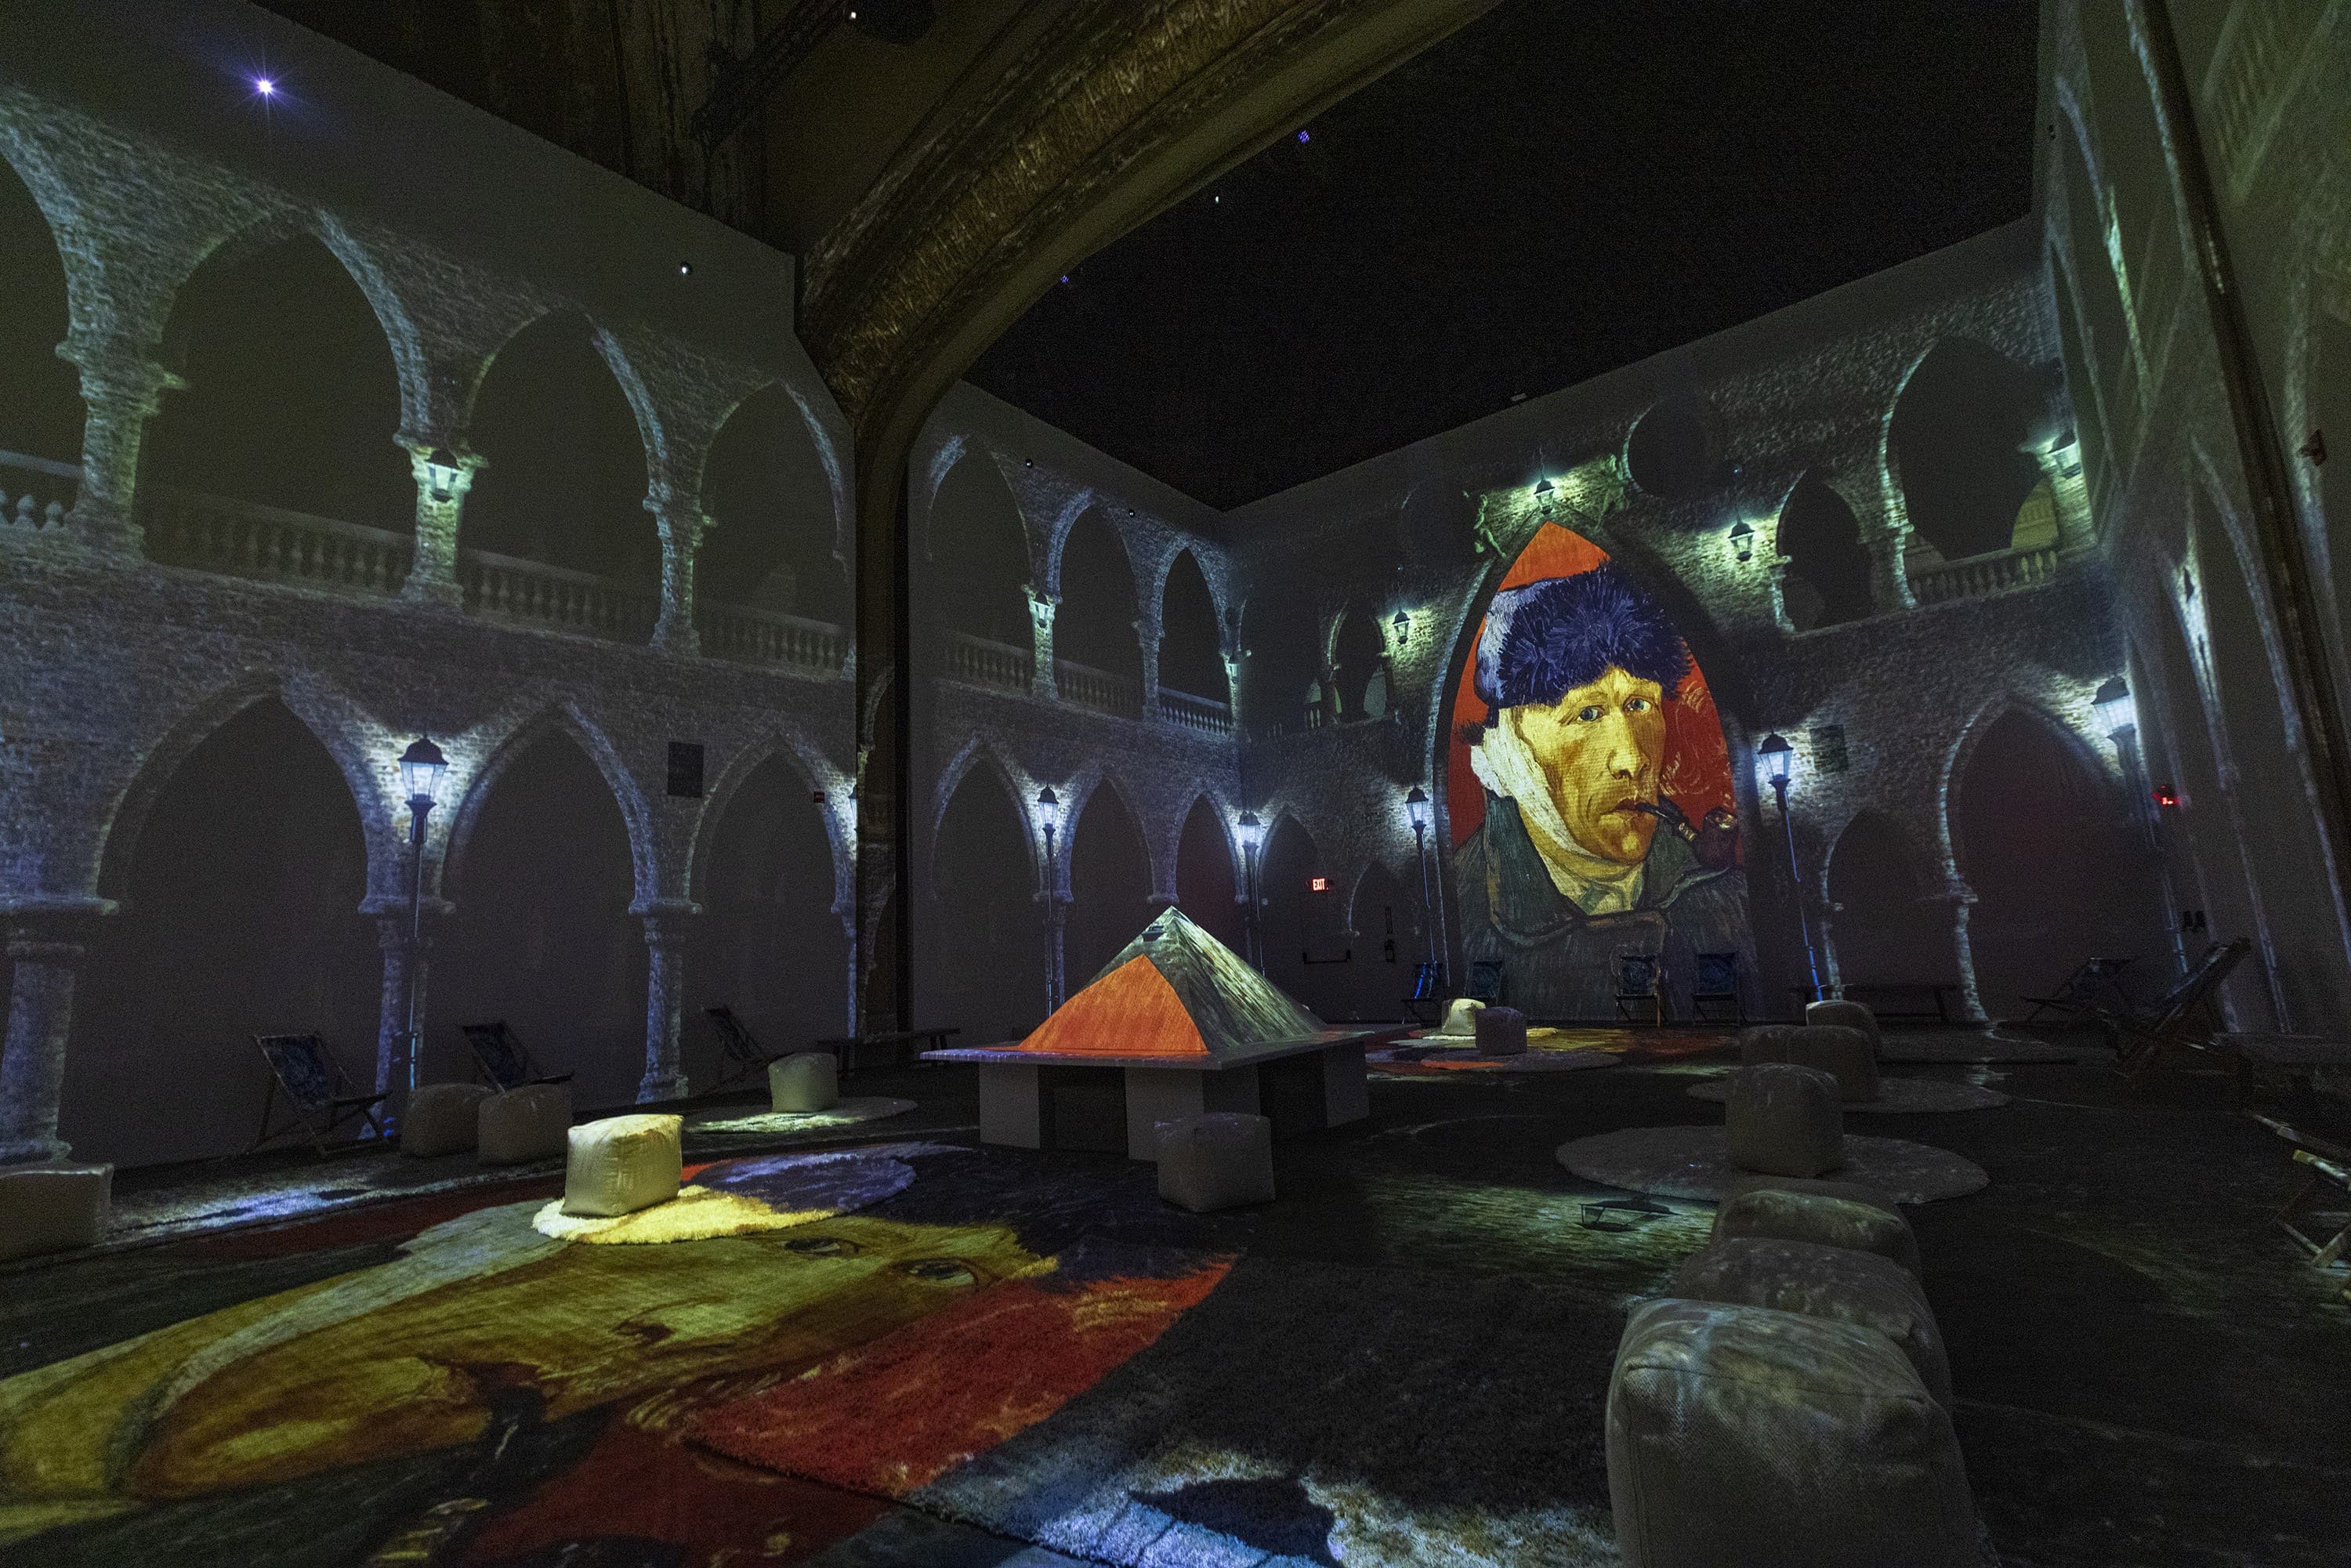 The central area in the Strand Theatre where Van Gogh’s works stretch floor-to-ceiling in an immersive light projection show. (Jesse Costa/WBUR)